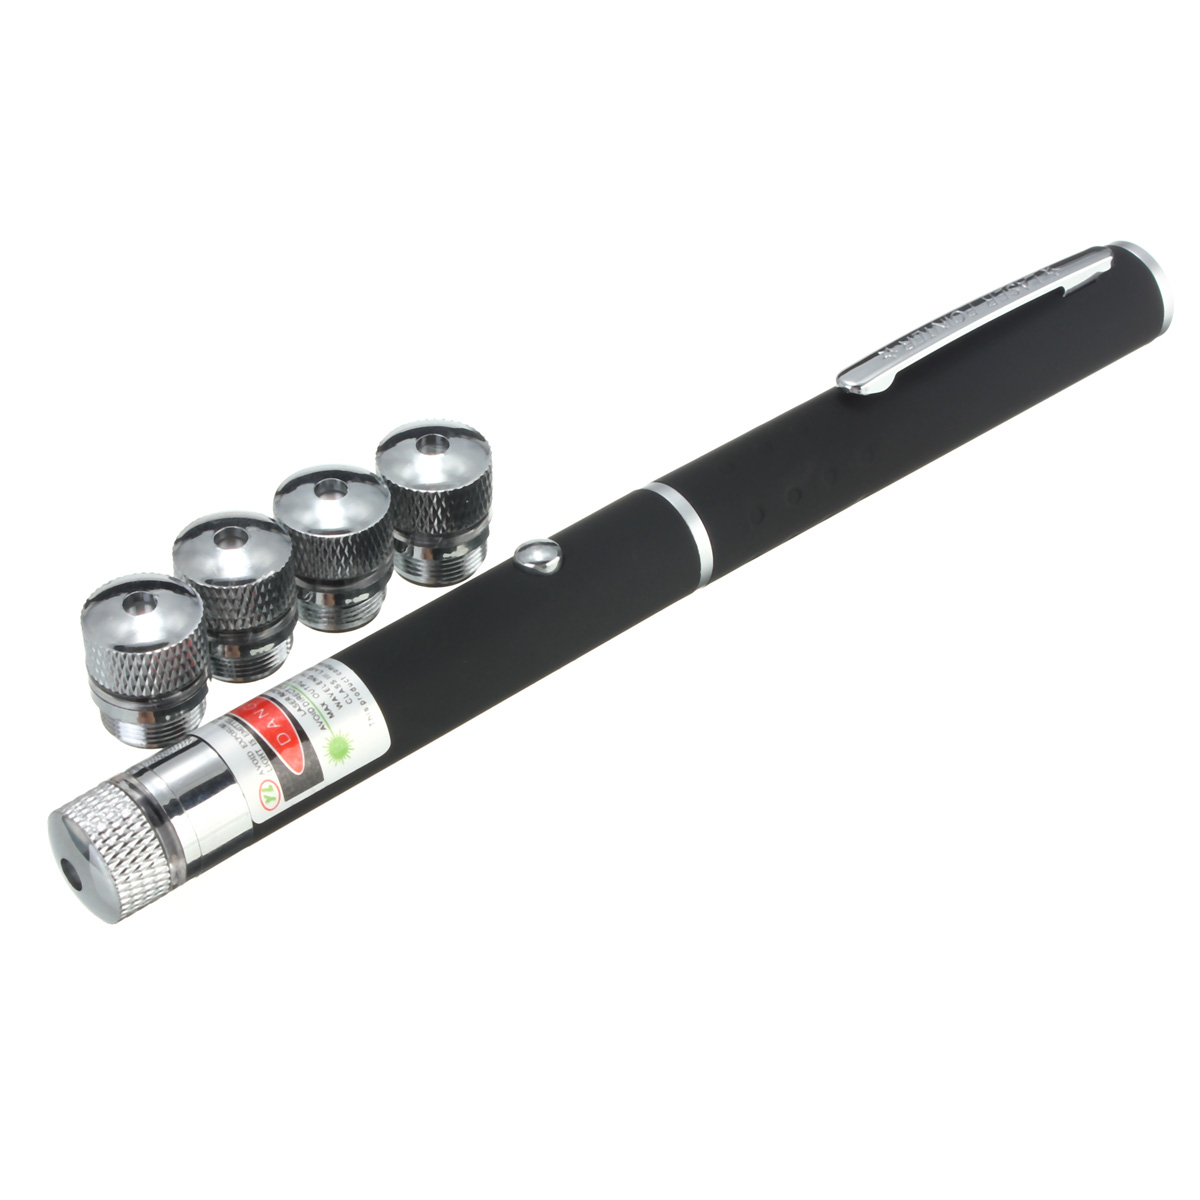 6 in 1 High Quality Powerful Green Laser Pointer Pen Beam Light 5Mile Lazer High Power 532nm Beam Ray Laser Pointer With 5 Cap